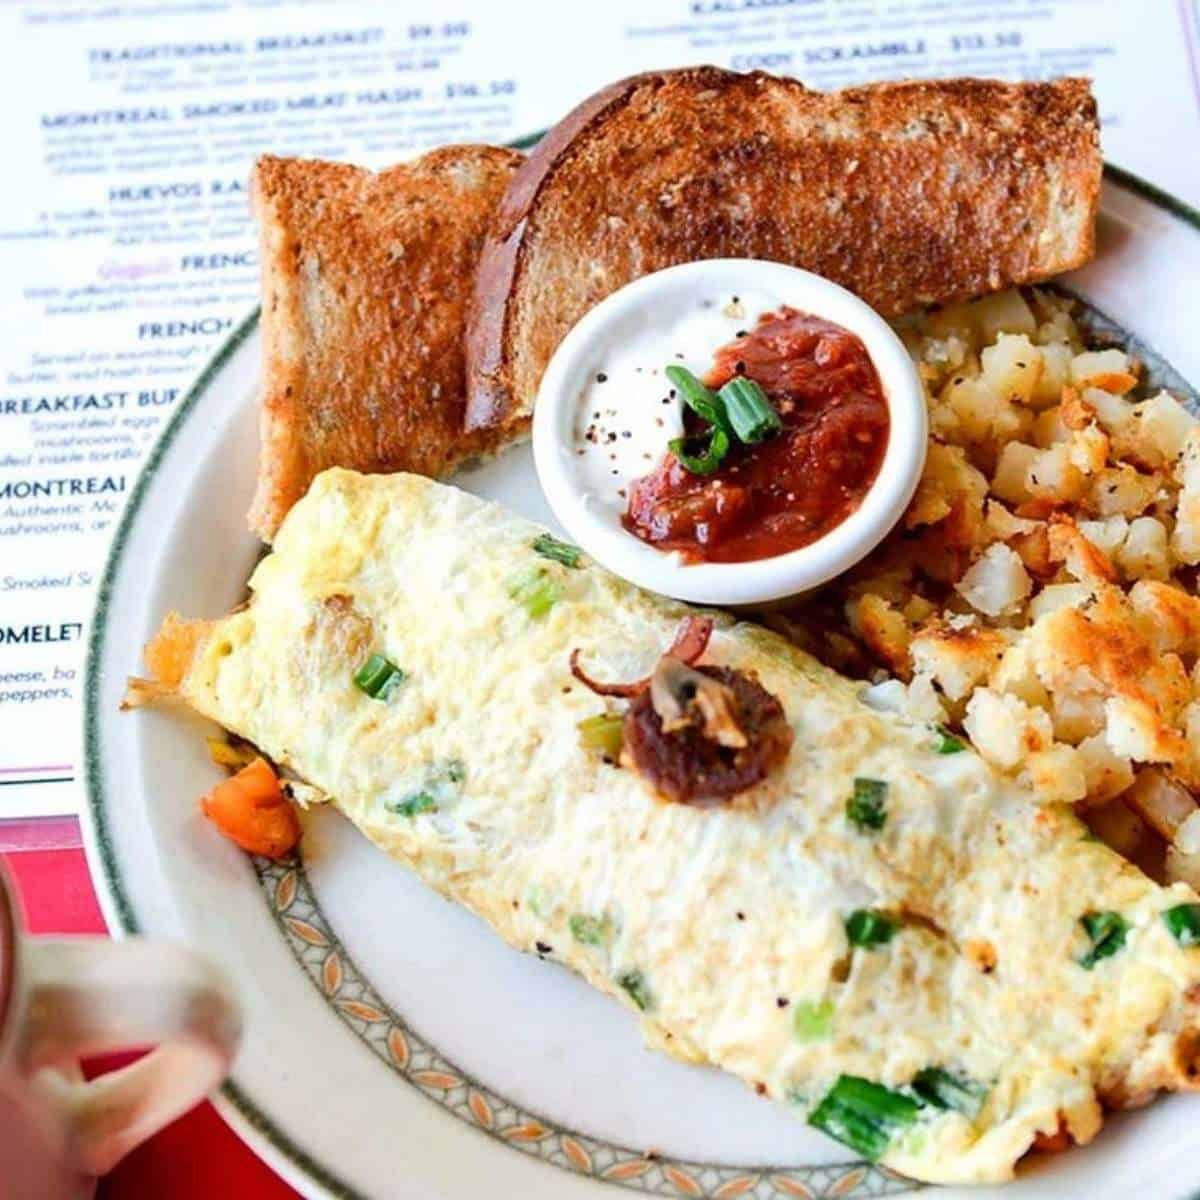 An omelette with toast and hashbrowns from Galaxie Diner in Calgary.